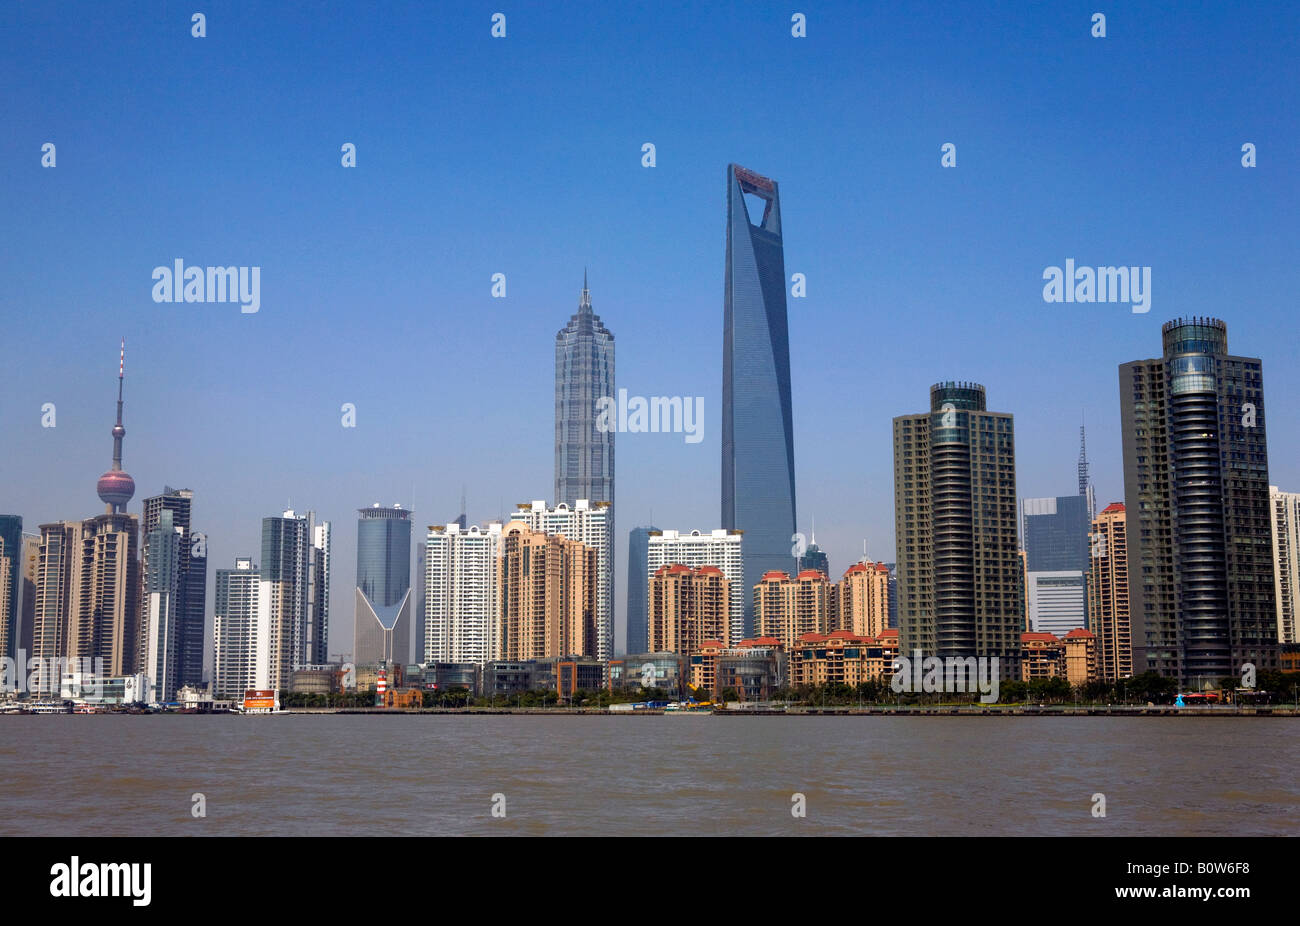 Pudong skyline consisting of the Oriental Pearl Tower, The Jin Mao Tower and the Shanghai World Financial Center in Shanghai. Stock Photo